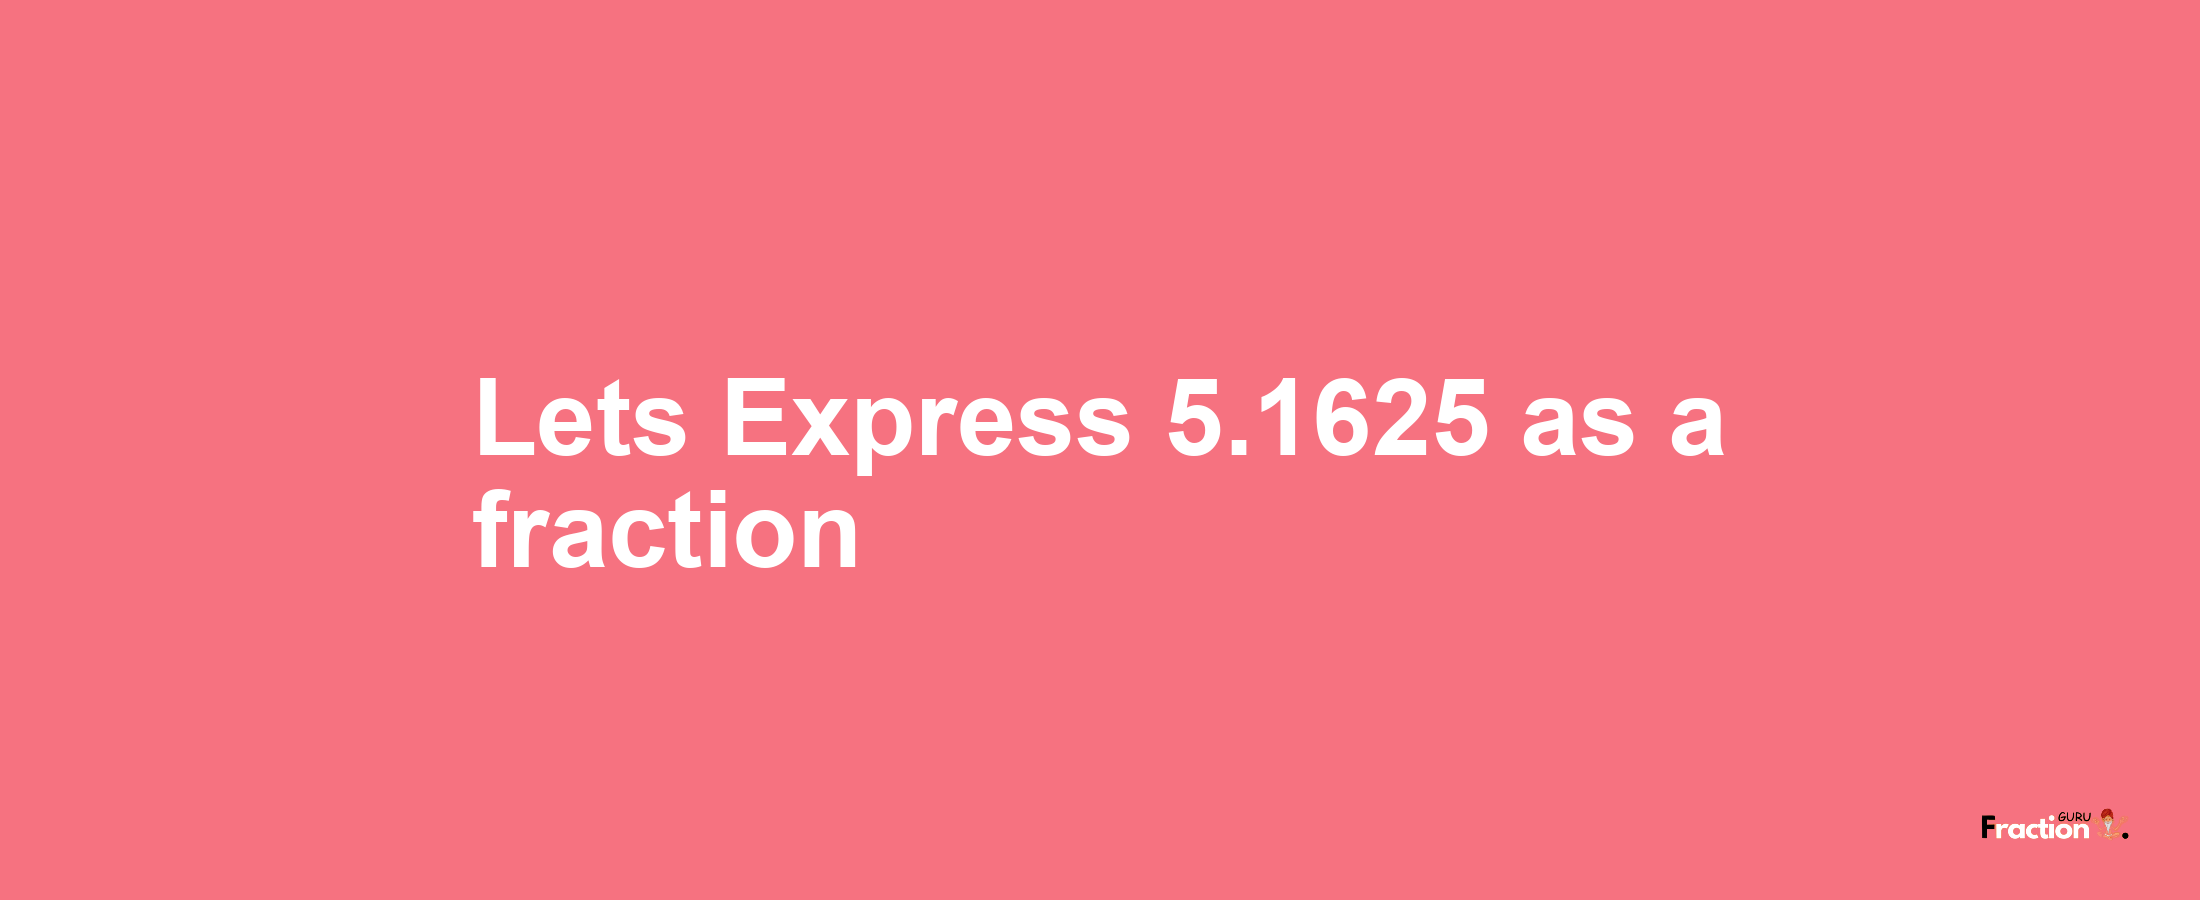 Lets Express 5.1625 as afraction